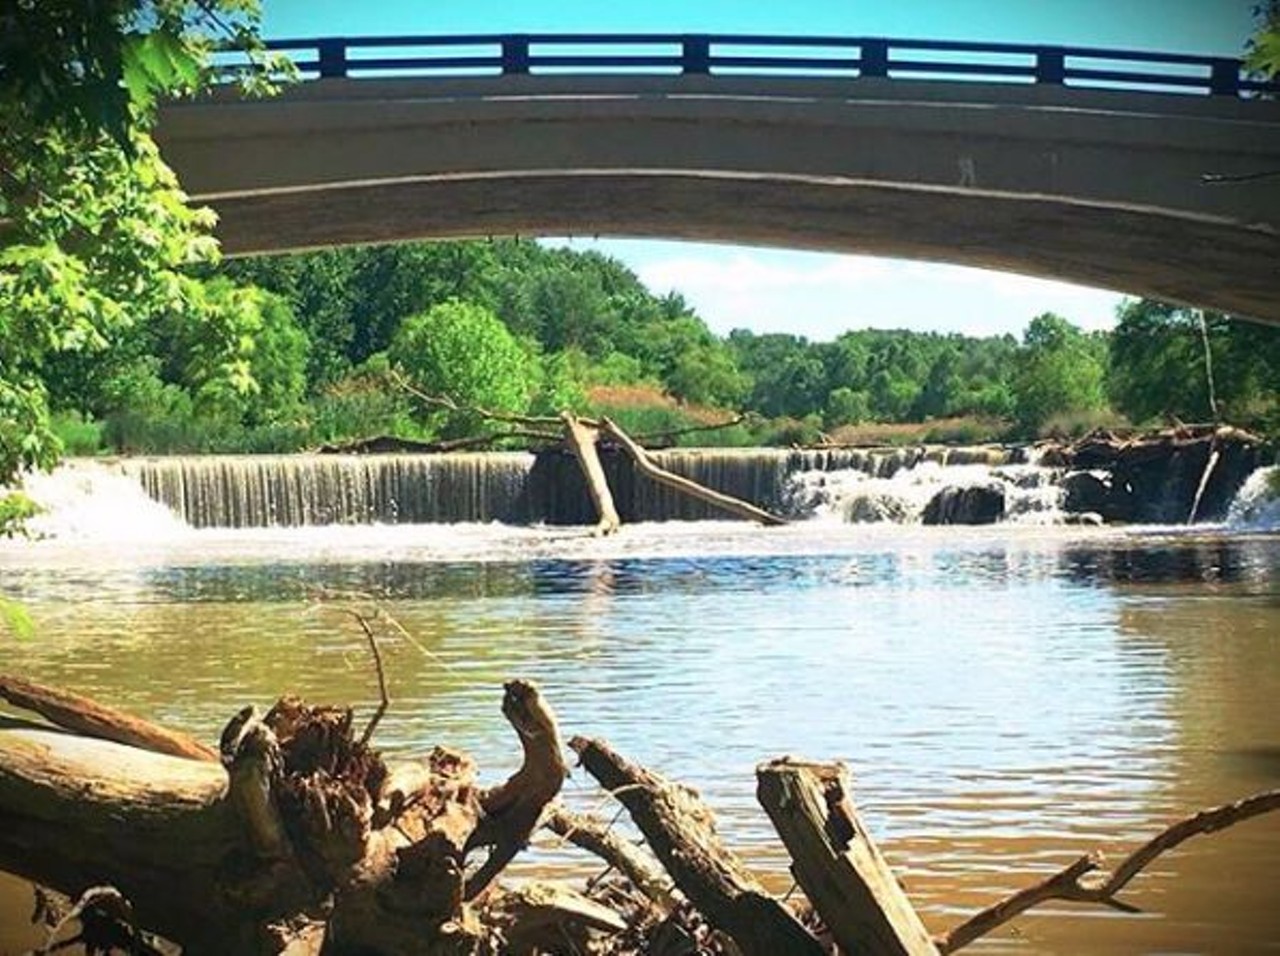  Mill Stream Run Reservation Waterfall
10749 Pearl Rd., Strongsville
The waterfall on this reservation is surrounded by pedestrian trails and nature. The Mill Stream Run Reservation Waterfall is about a 30 minute drive from Cleveland.
Photo via nicolem7978/Instagram